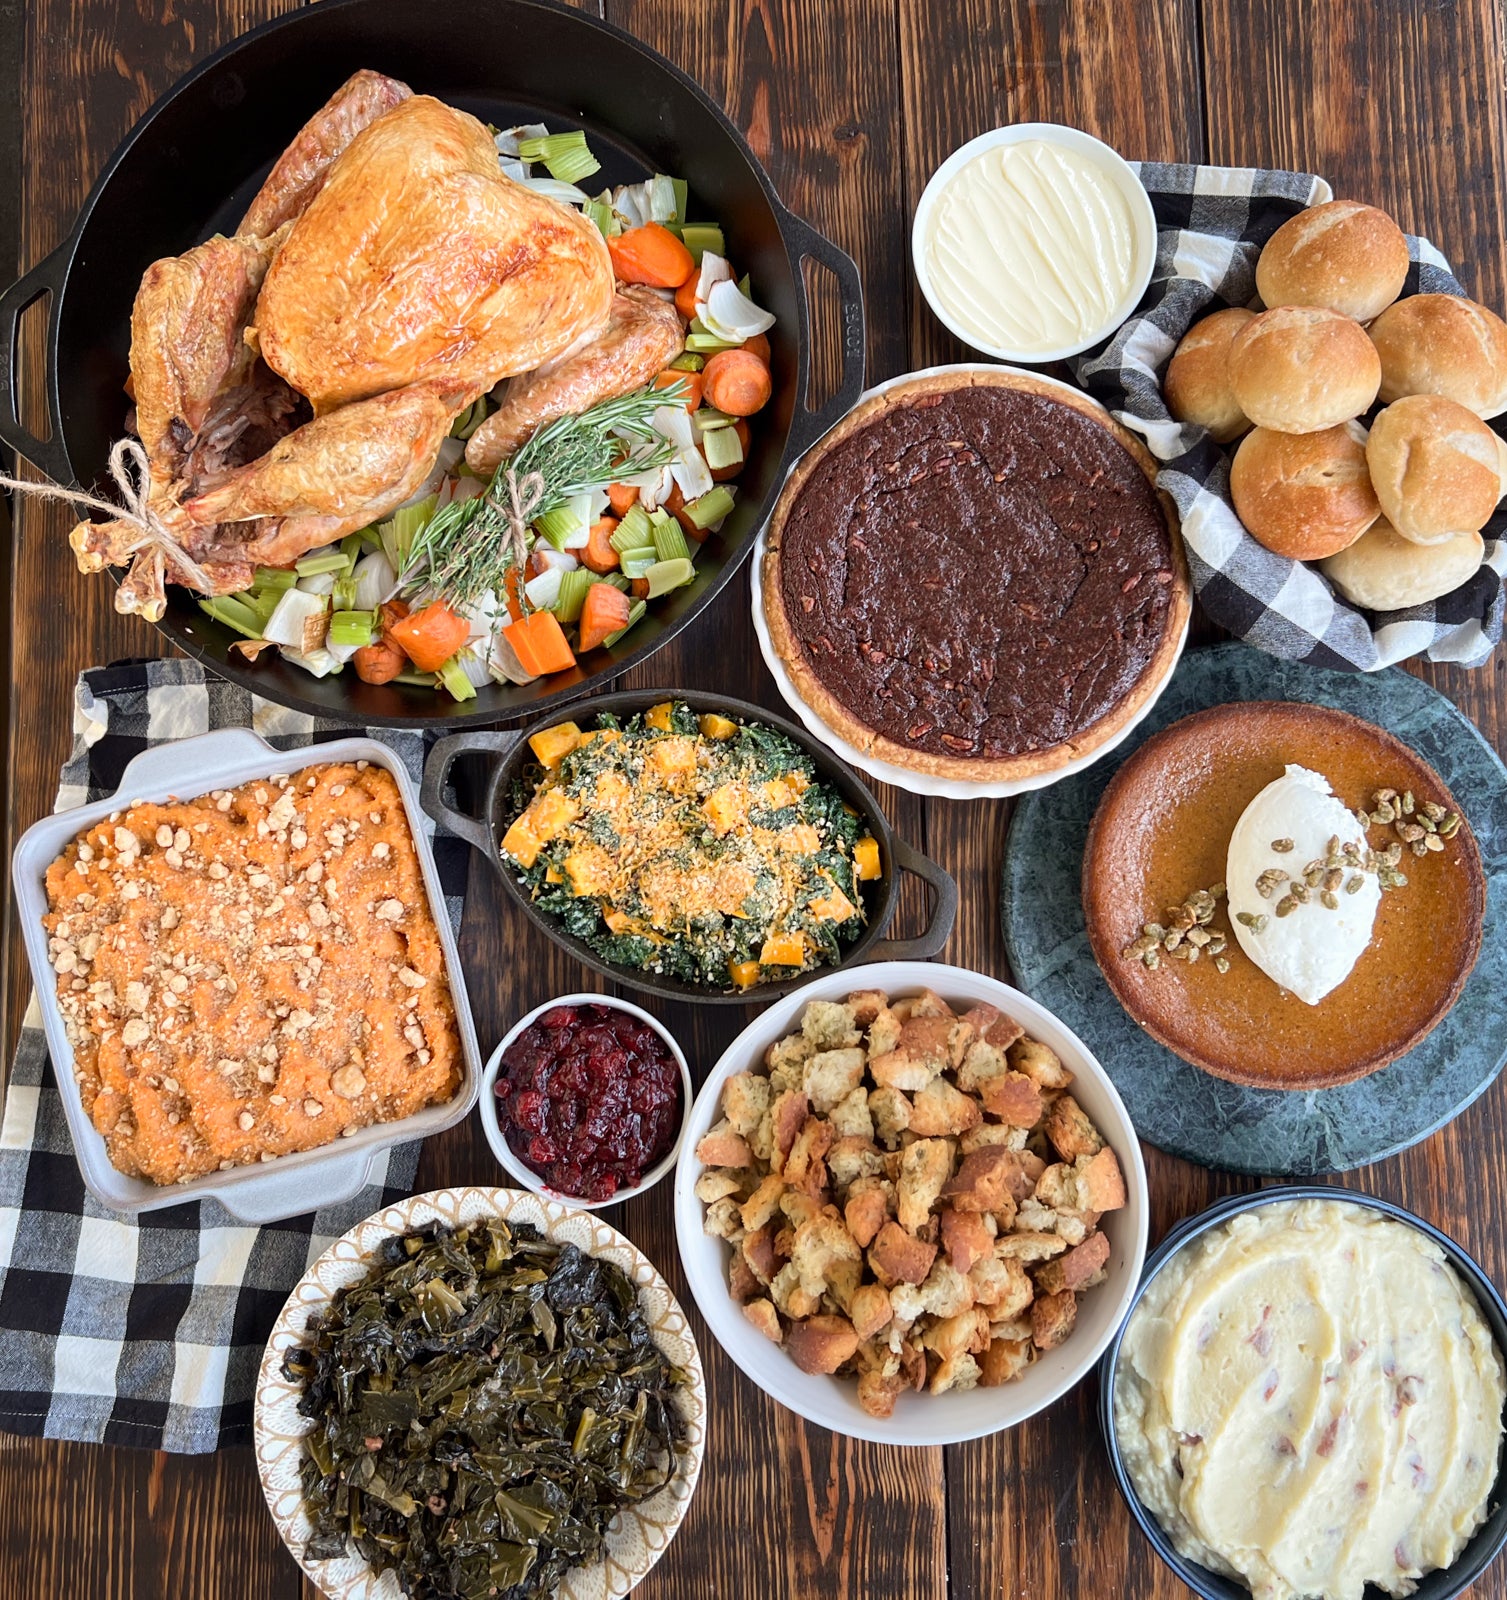 Raleigh Durham, NC Thanksgiving Meal Delivery